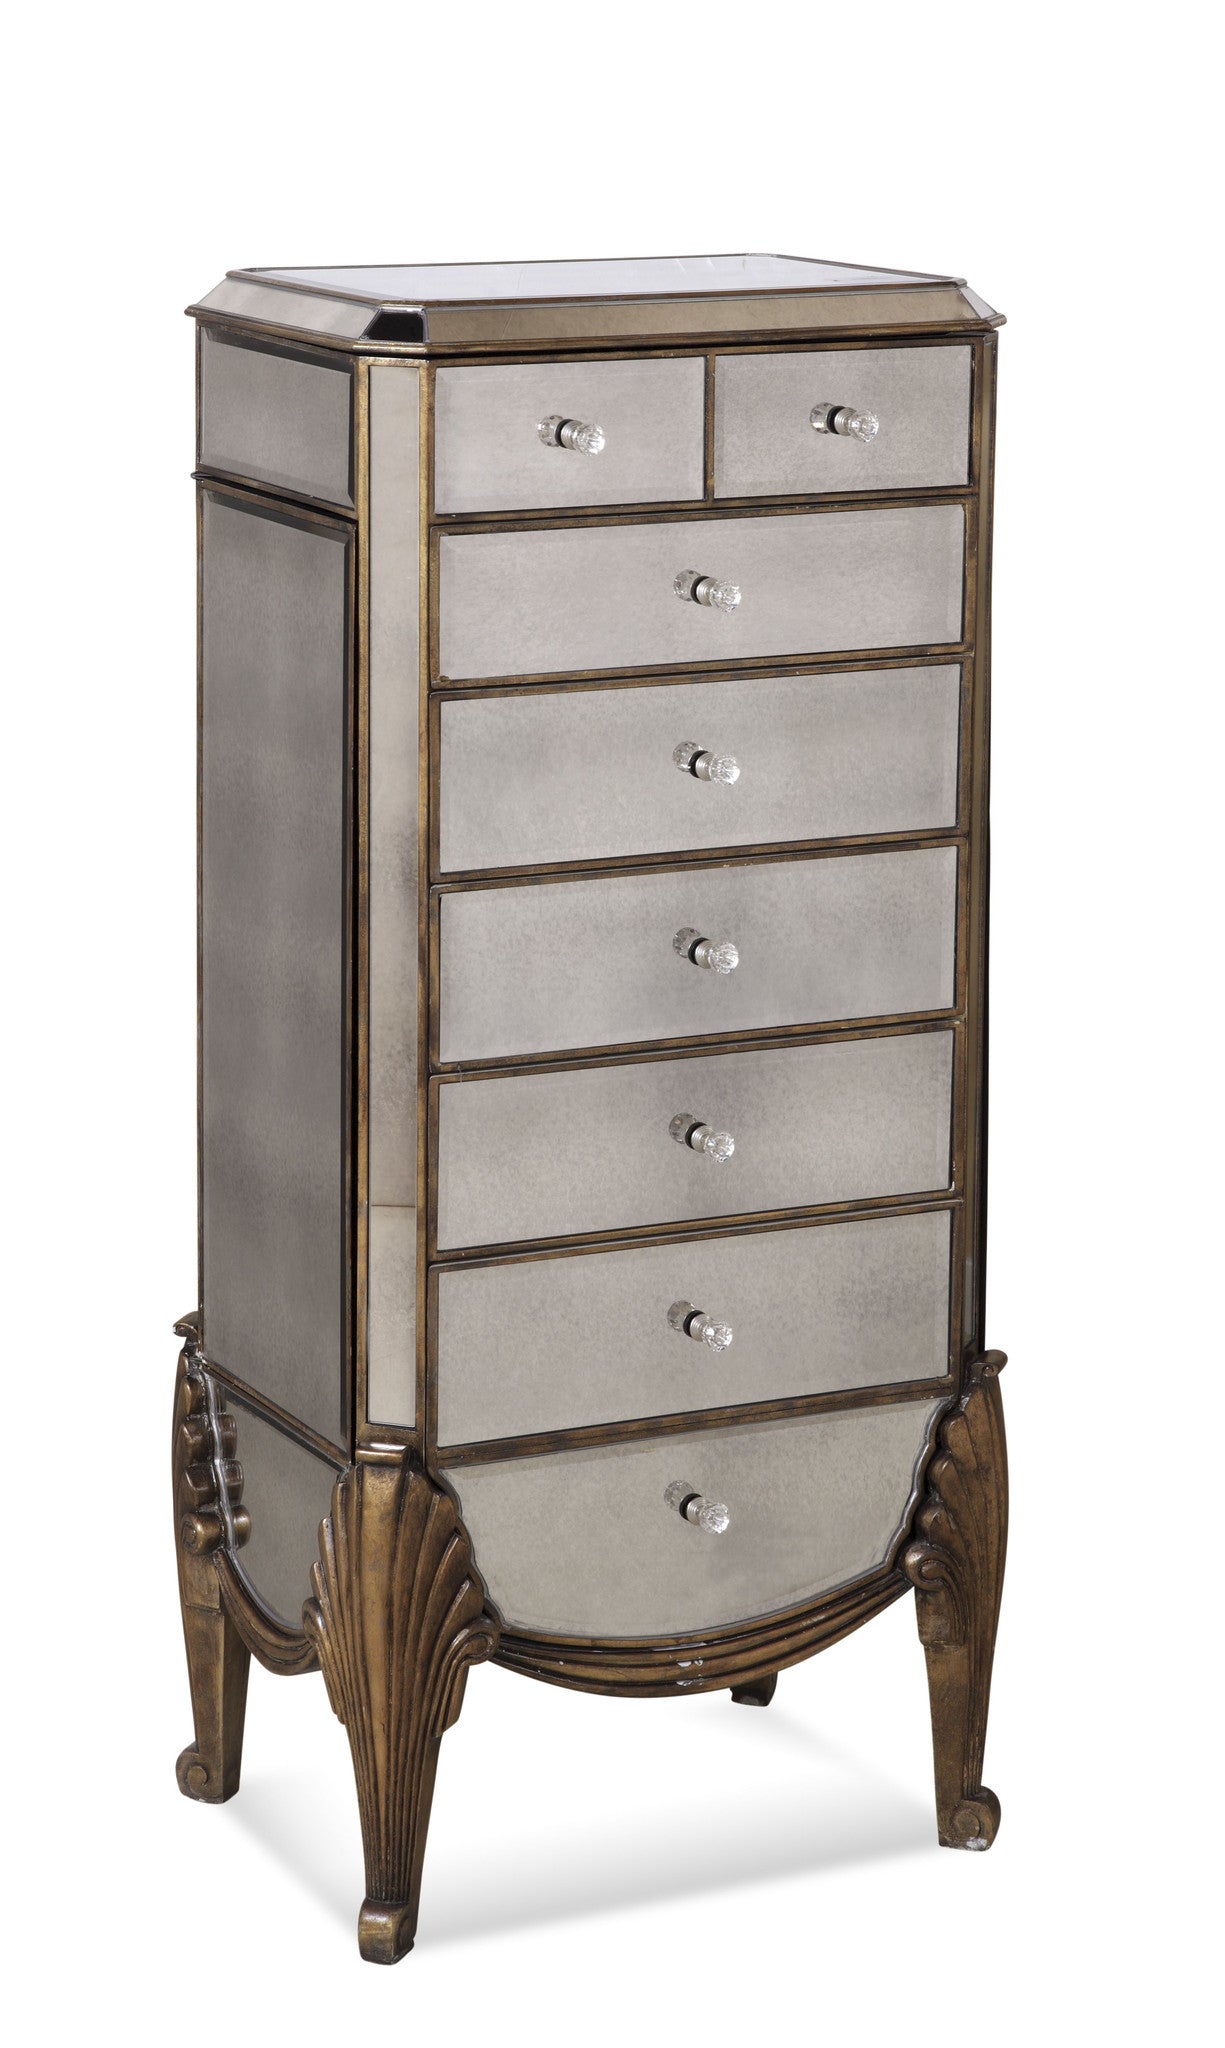 Claire Mirrored Jewelry Armoire